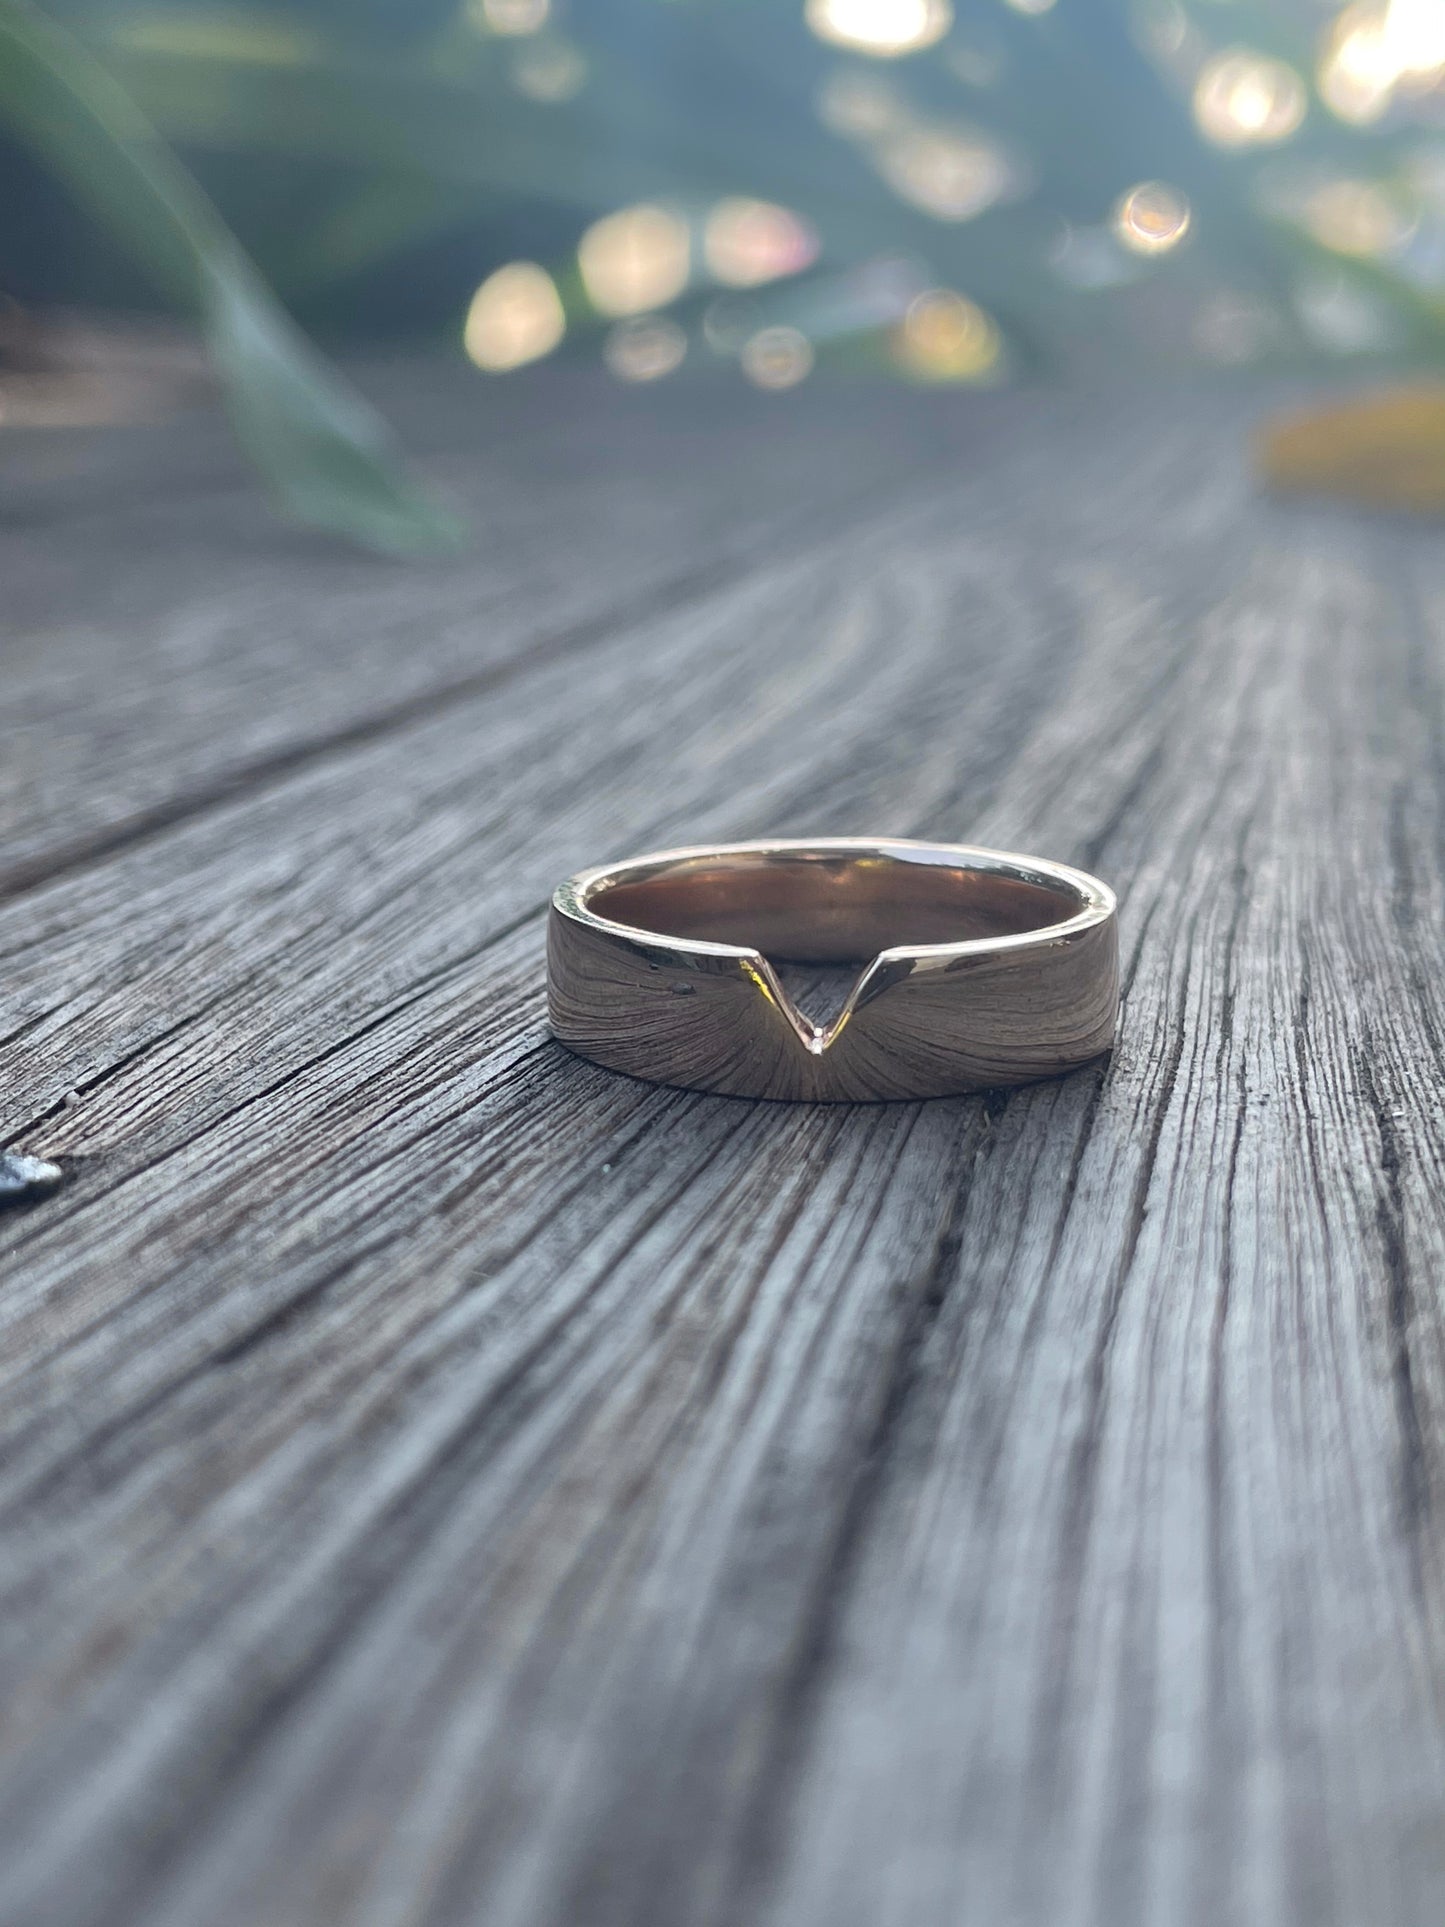 9ct Rose Gold Ring with V Shape Cut Out